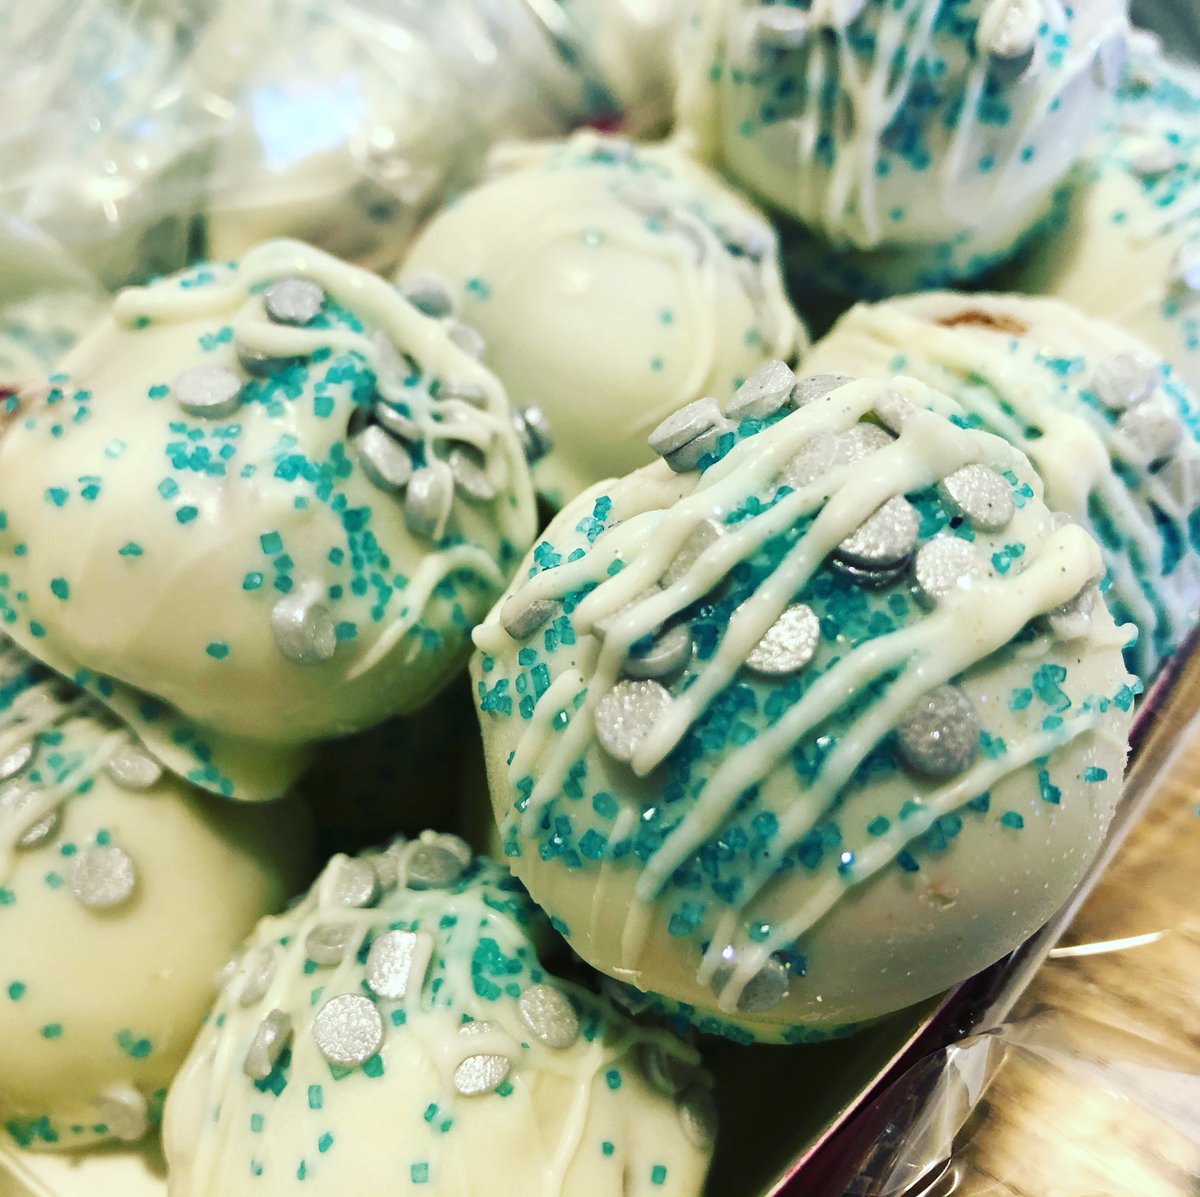 It’s our favorite day of the year... getting to deliver gifts to all of our loyal clients! These cake balls win major brownie points, even though they are a resolution killer. 😉💜 #HireAMaven #CheerstoaNewYear